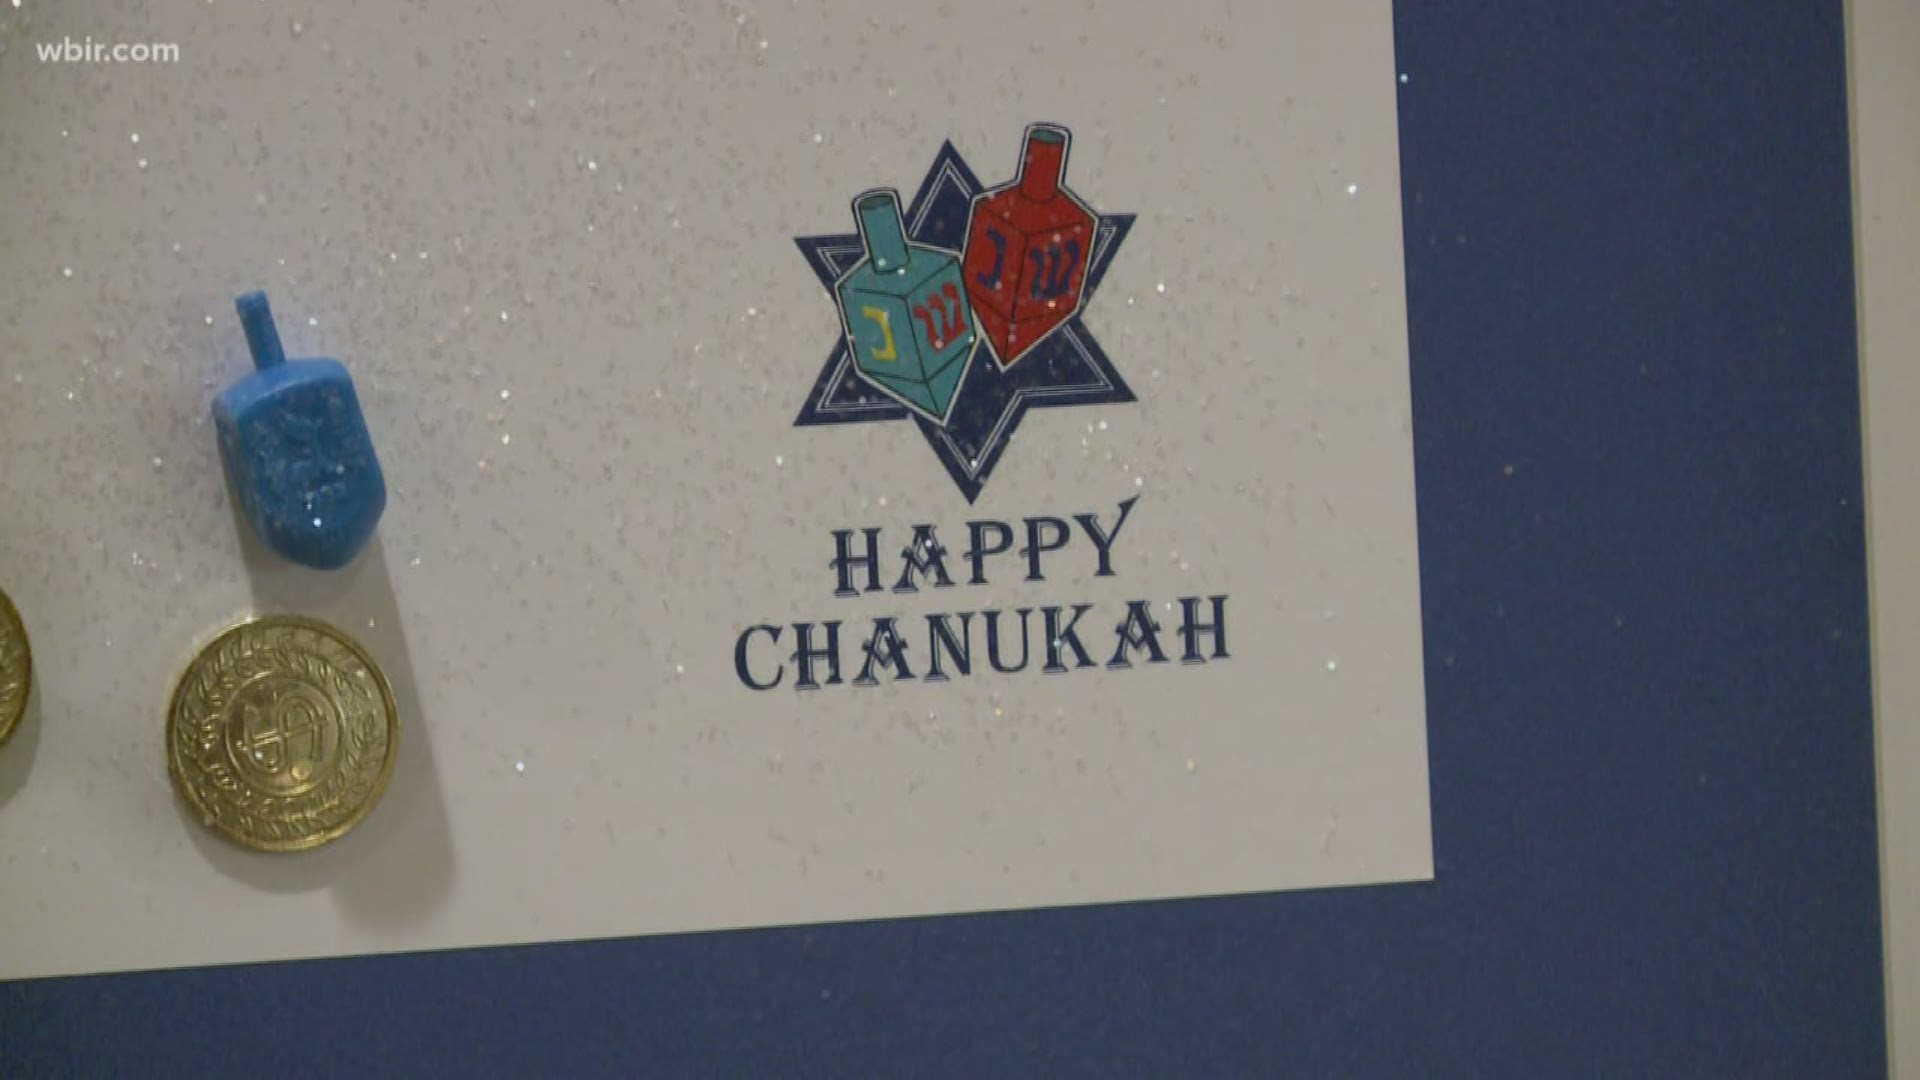 Heska Amuna Synagogue held a special dinner to celebrate Hanukkah, serving up Latkes with all the trimmings.